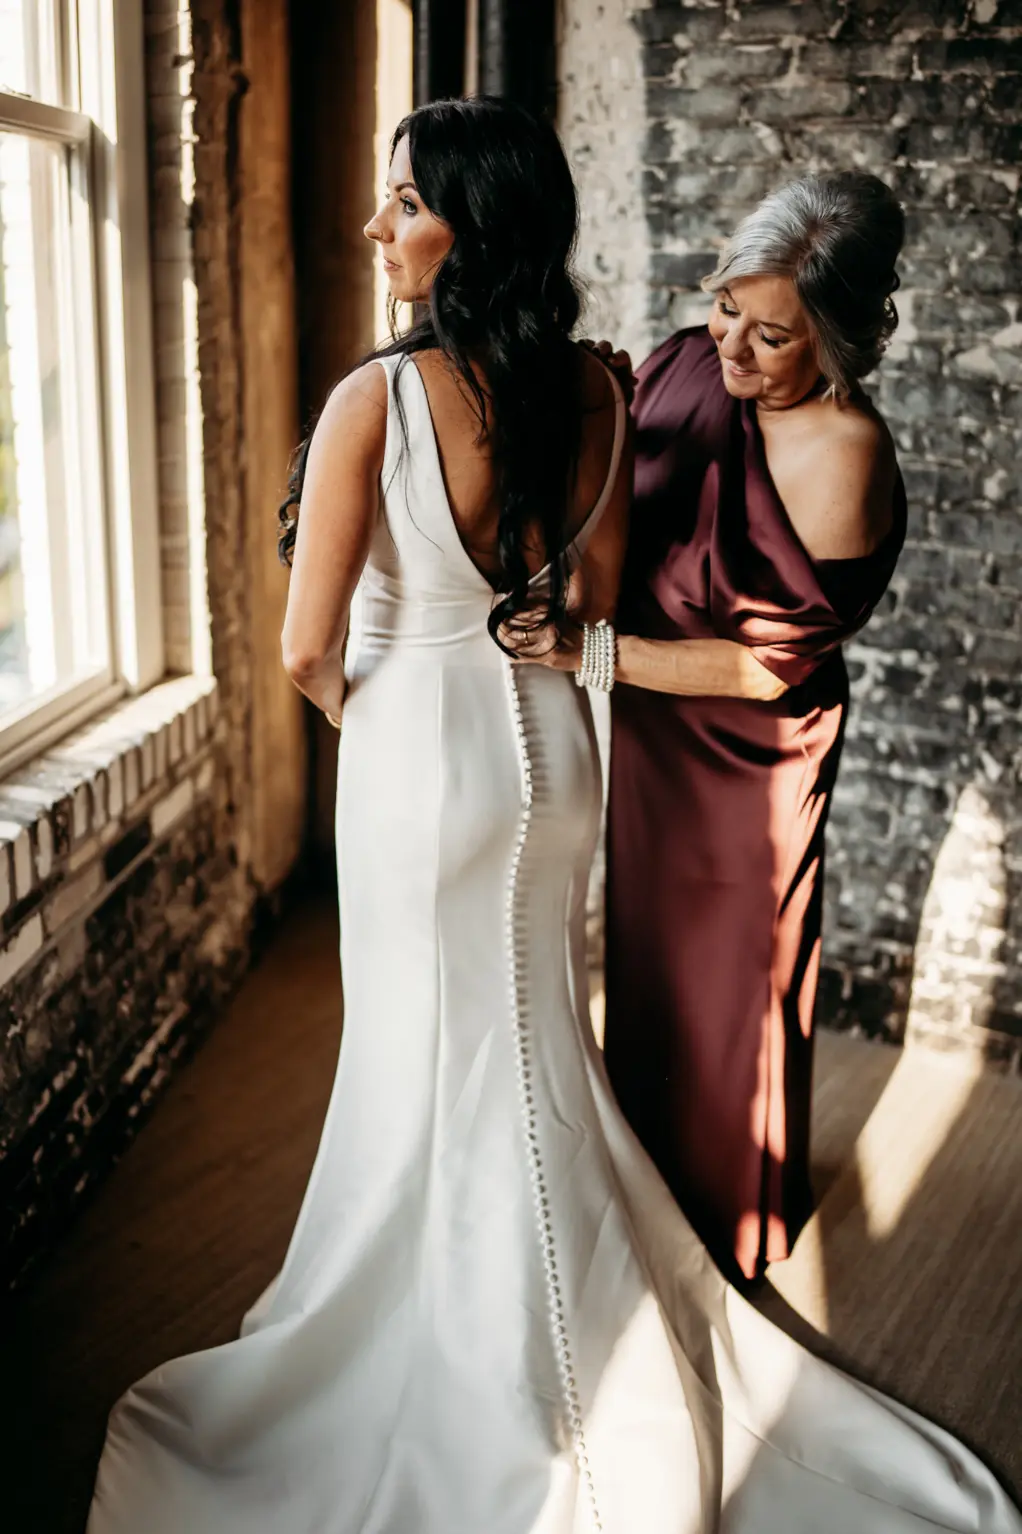 Bride and Mother Getting Ready | Classic Ivory Open Back Satin Button Down Wedding Dress Ideas | Bridal Hair and Makeup Inspiration | Tampa Bay Femme Akoi Beauty Studio | Photographer Videographer Sabrina Autumn Photography